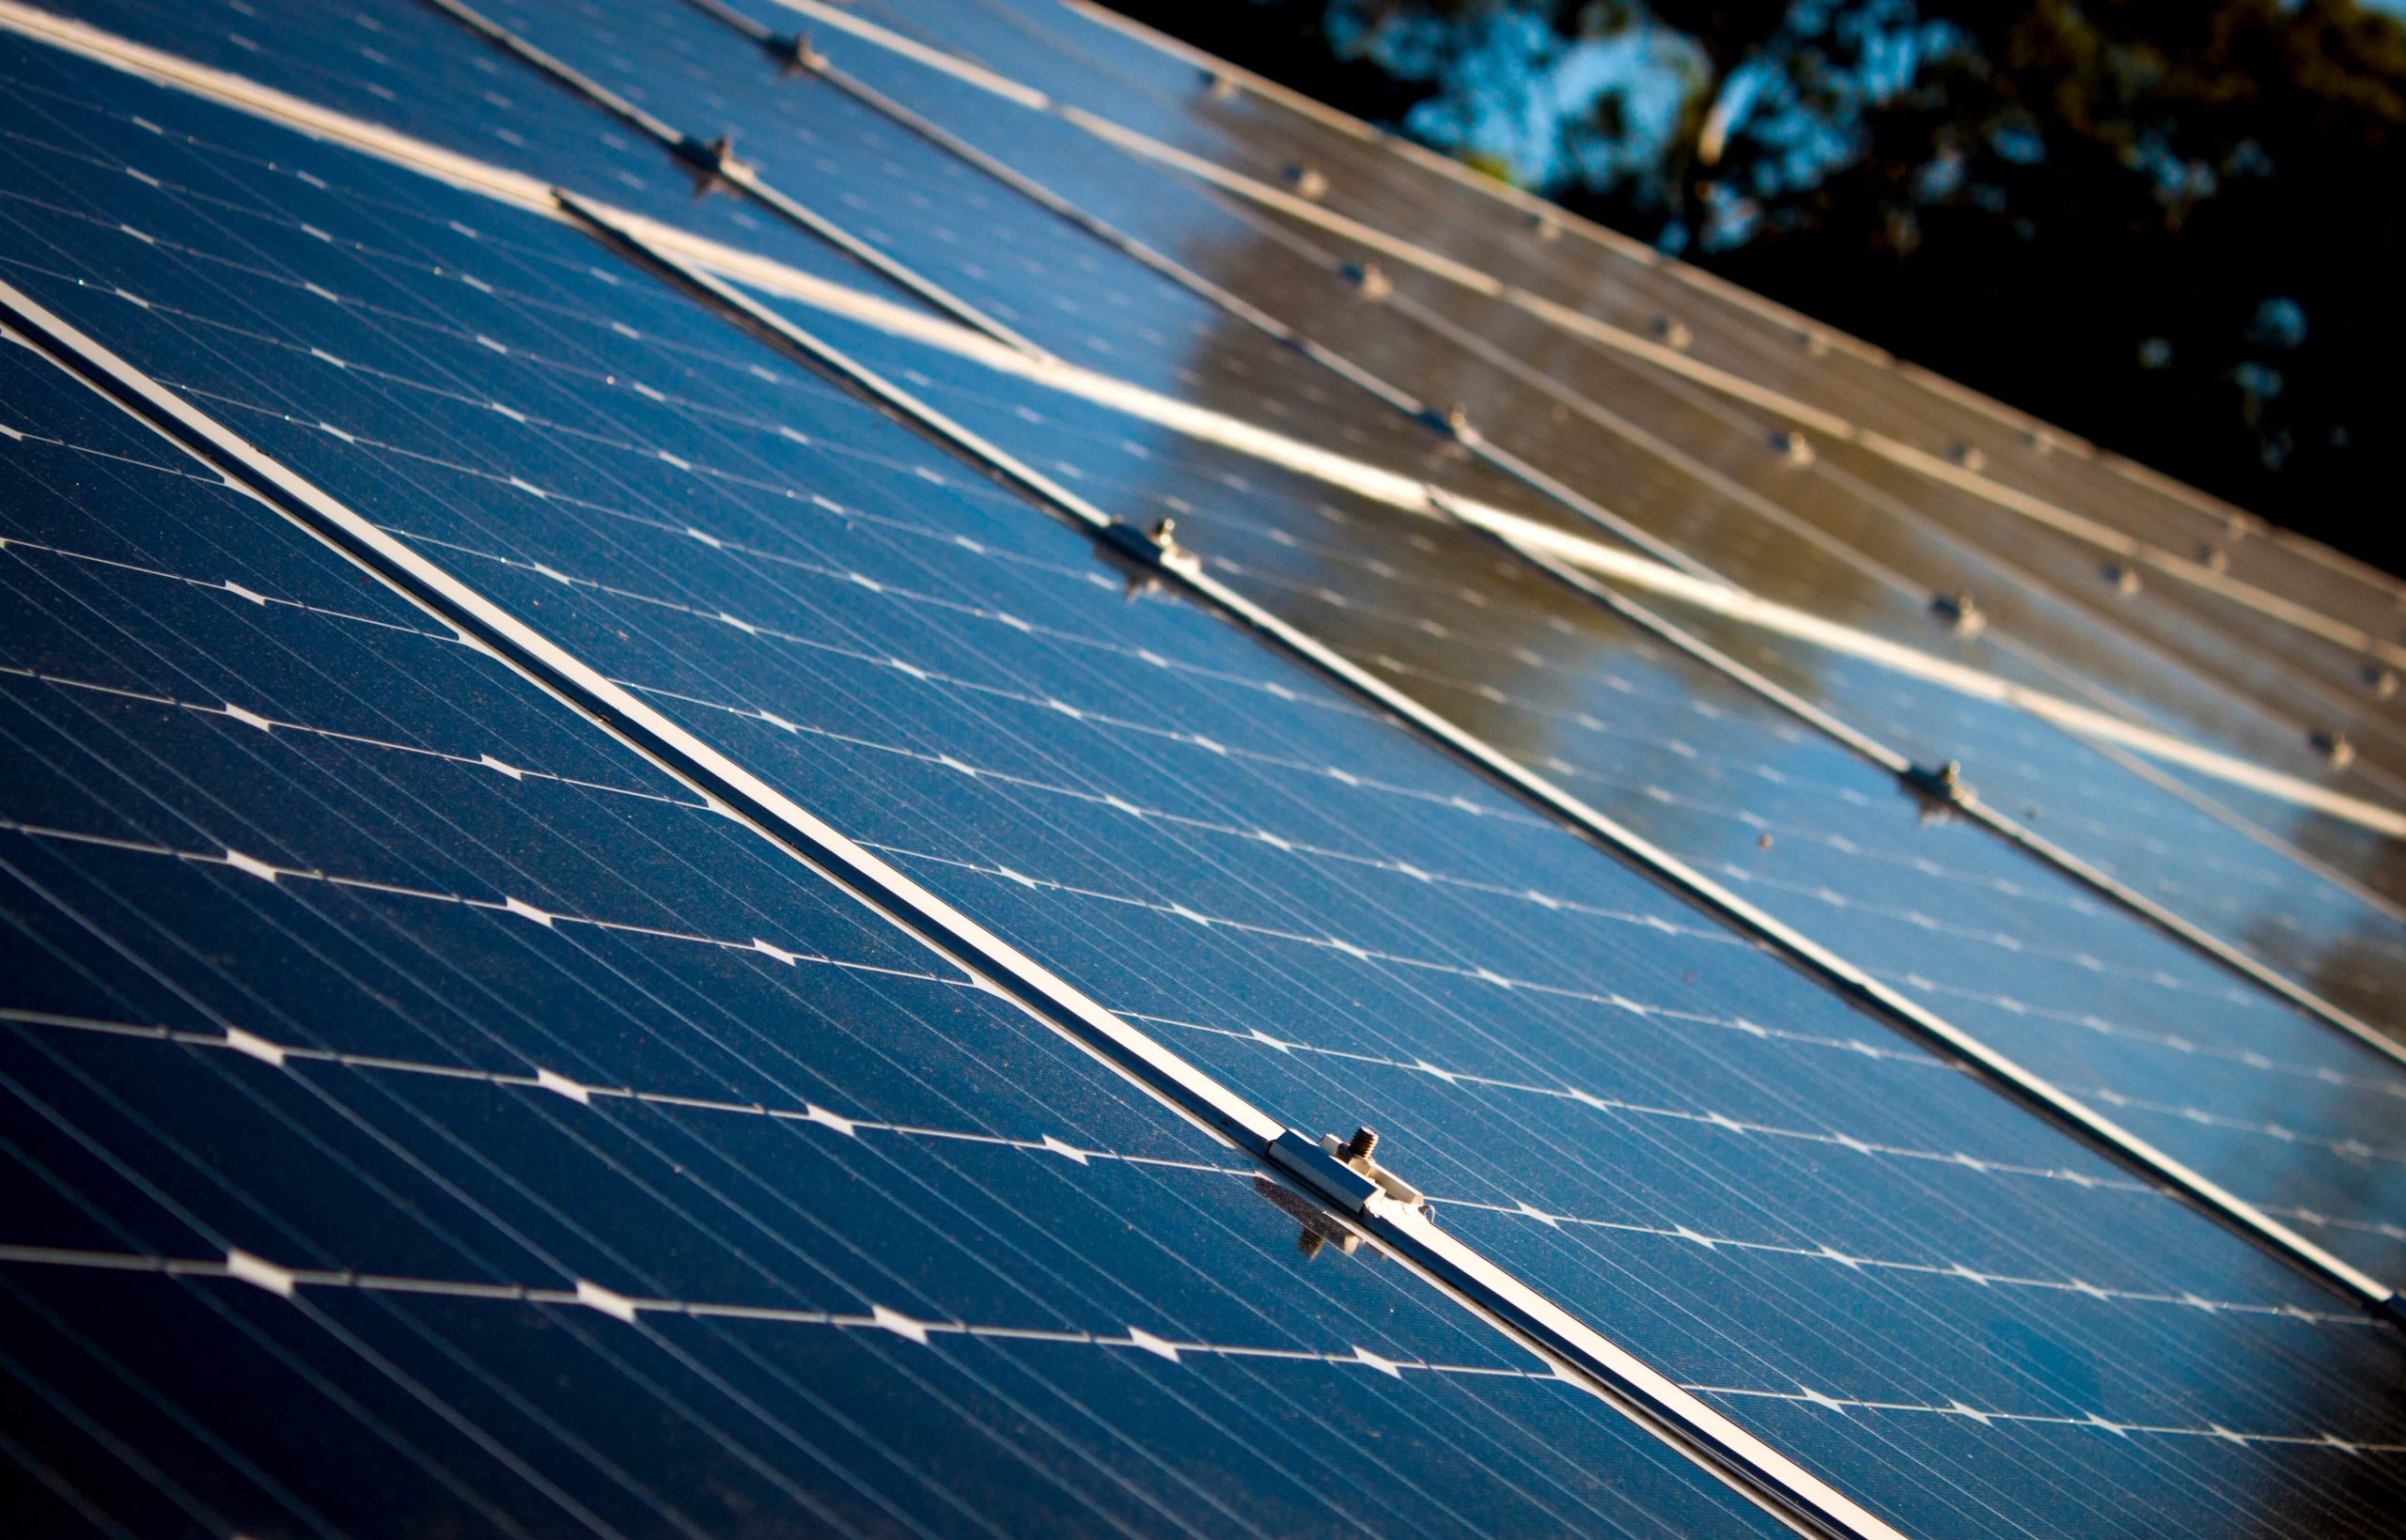 What You Need To Know About Selling Your Home With Solar!